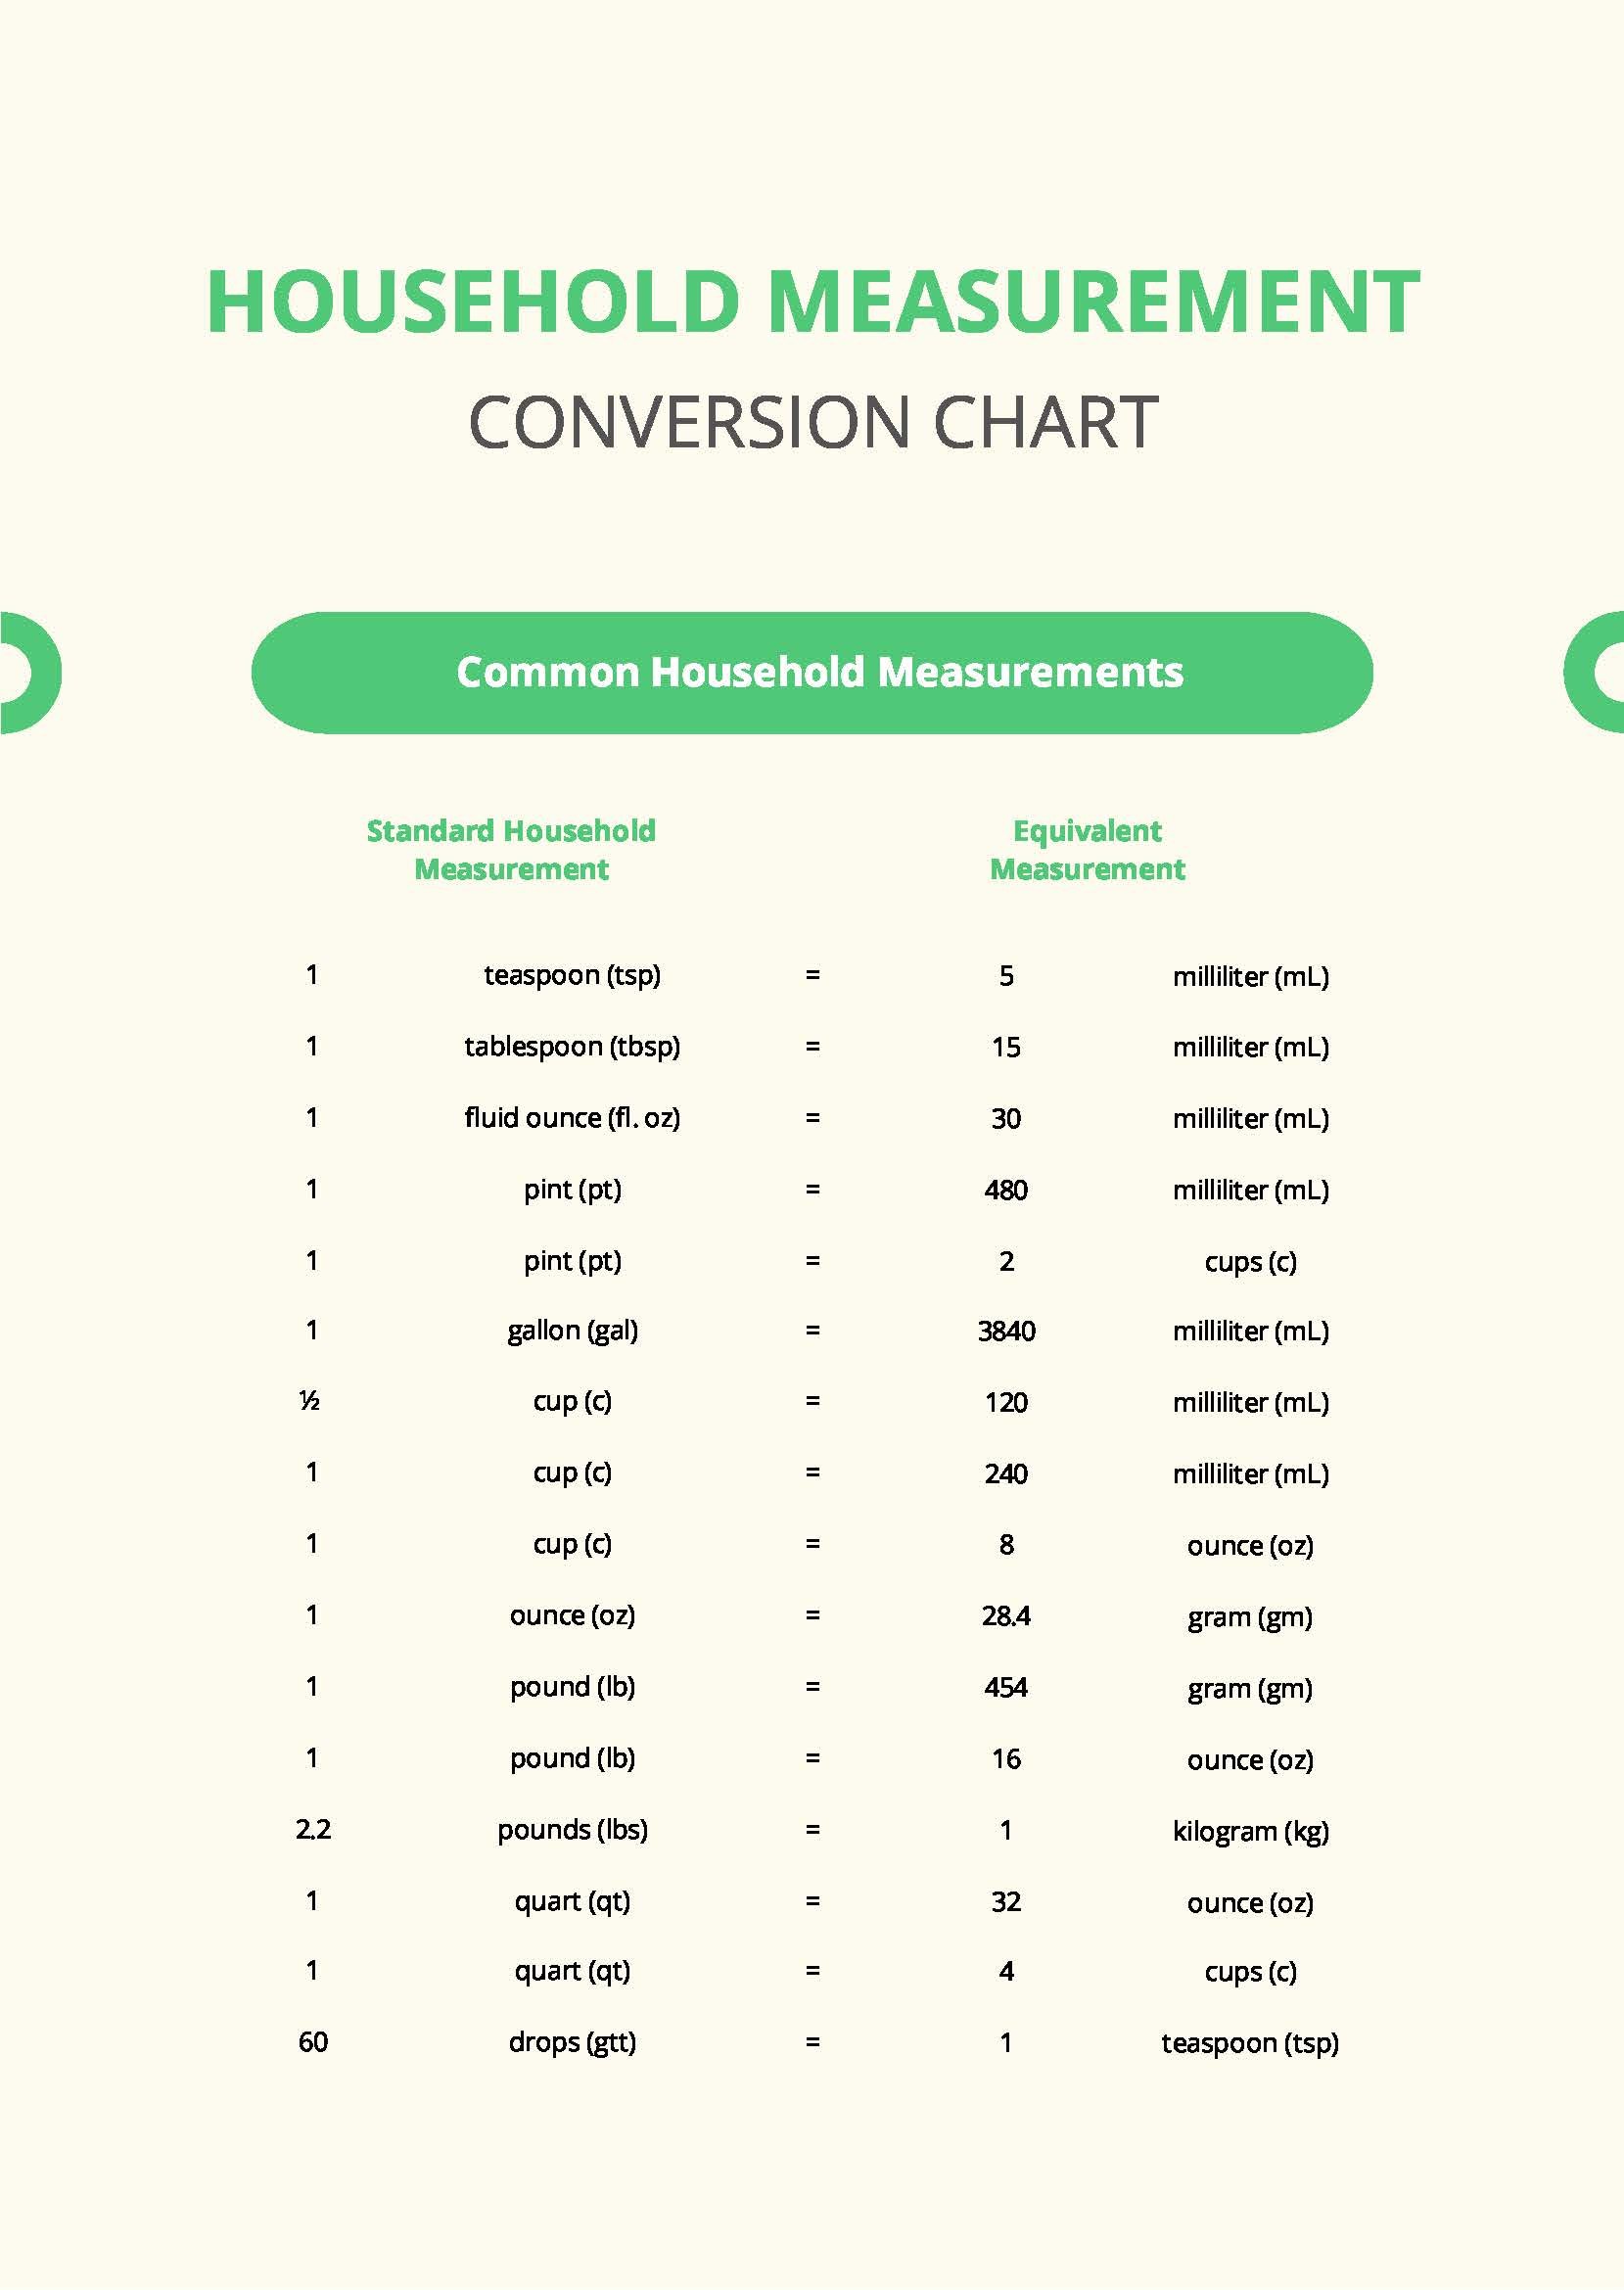 Household Measurement Conversion Chart in PDF